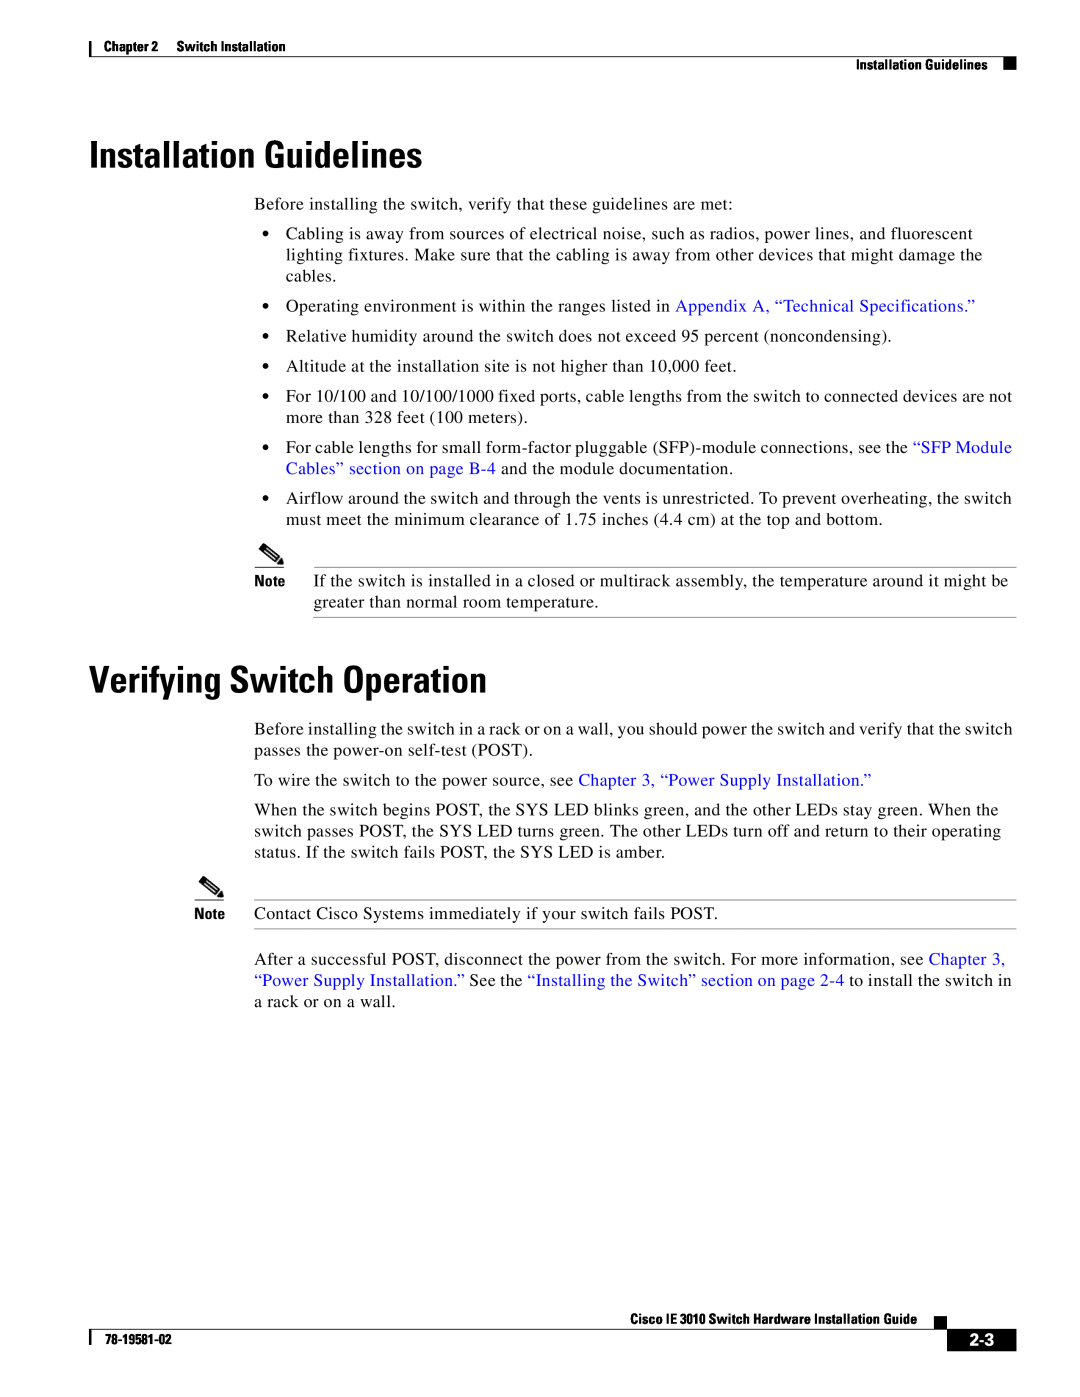 Cisco Systems IE301024TC manual Installation Guidelines, Verifying Switch Operation 